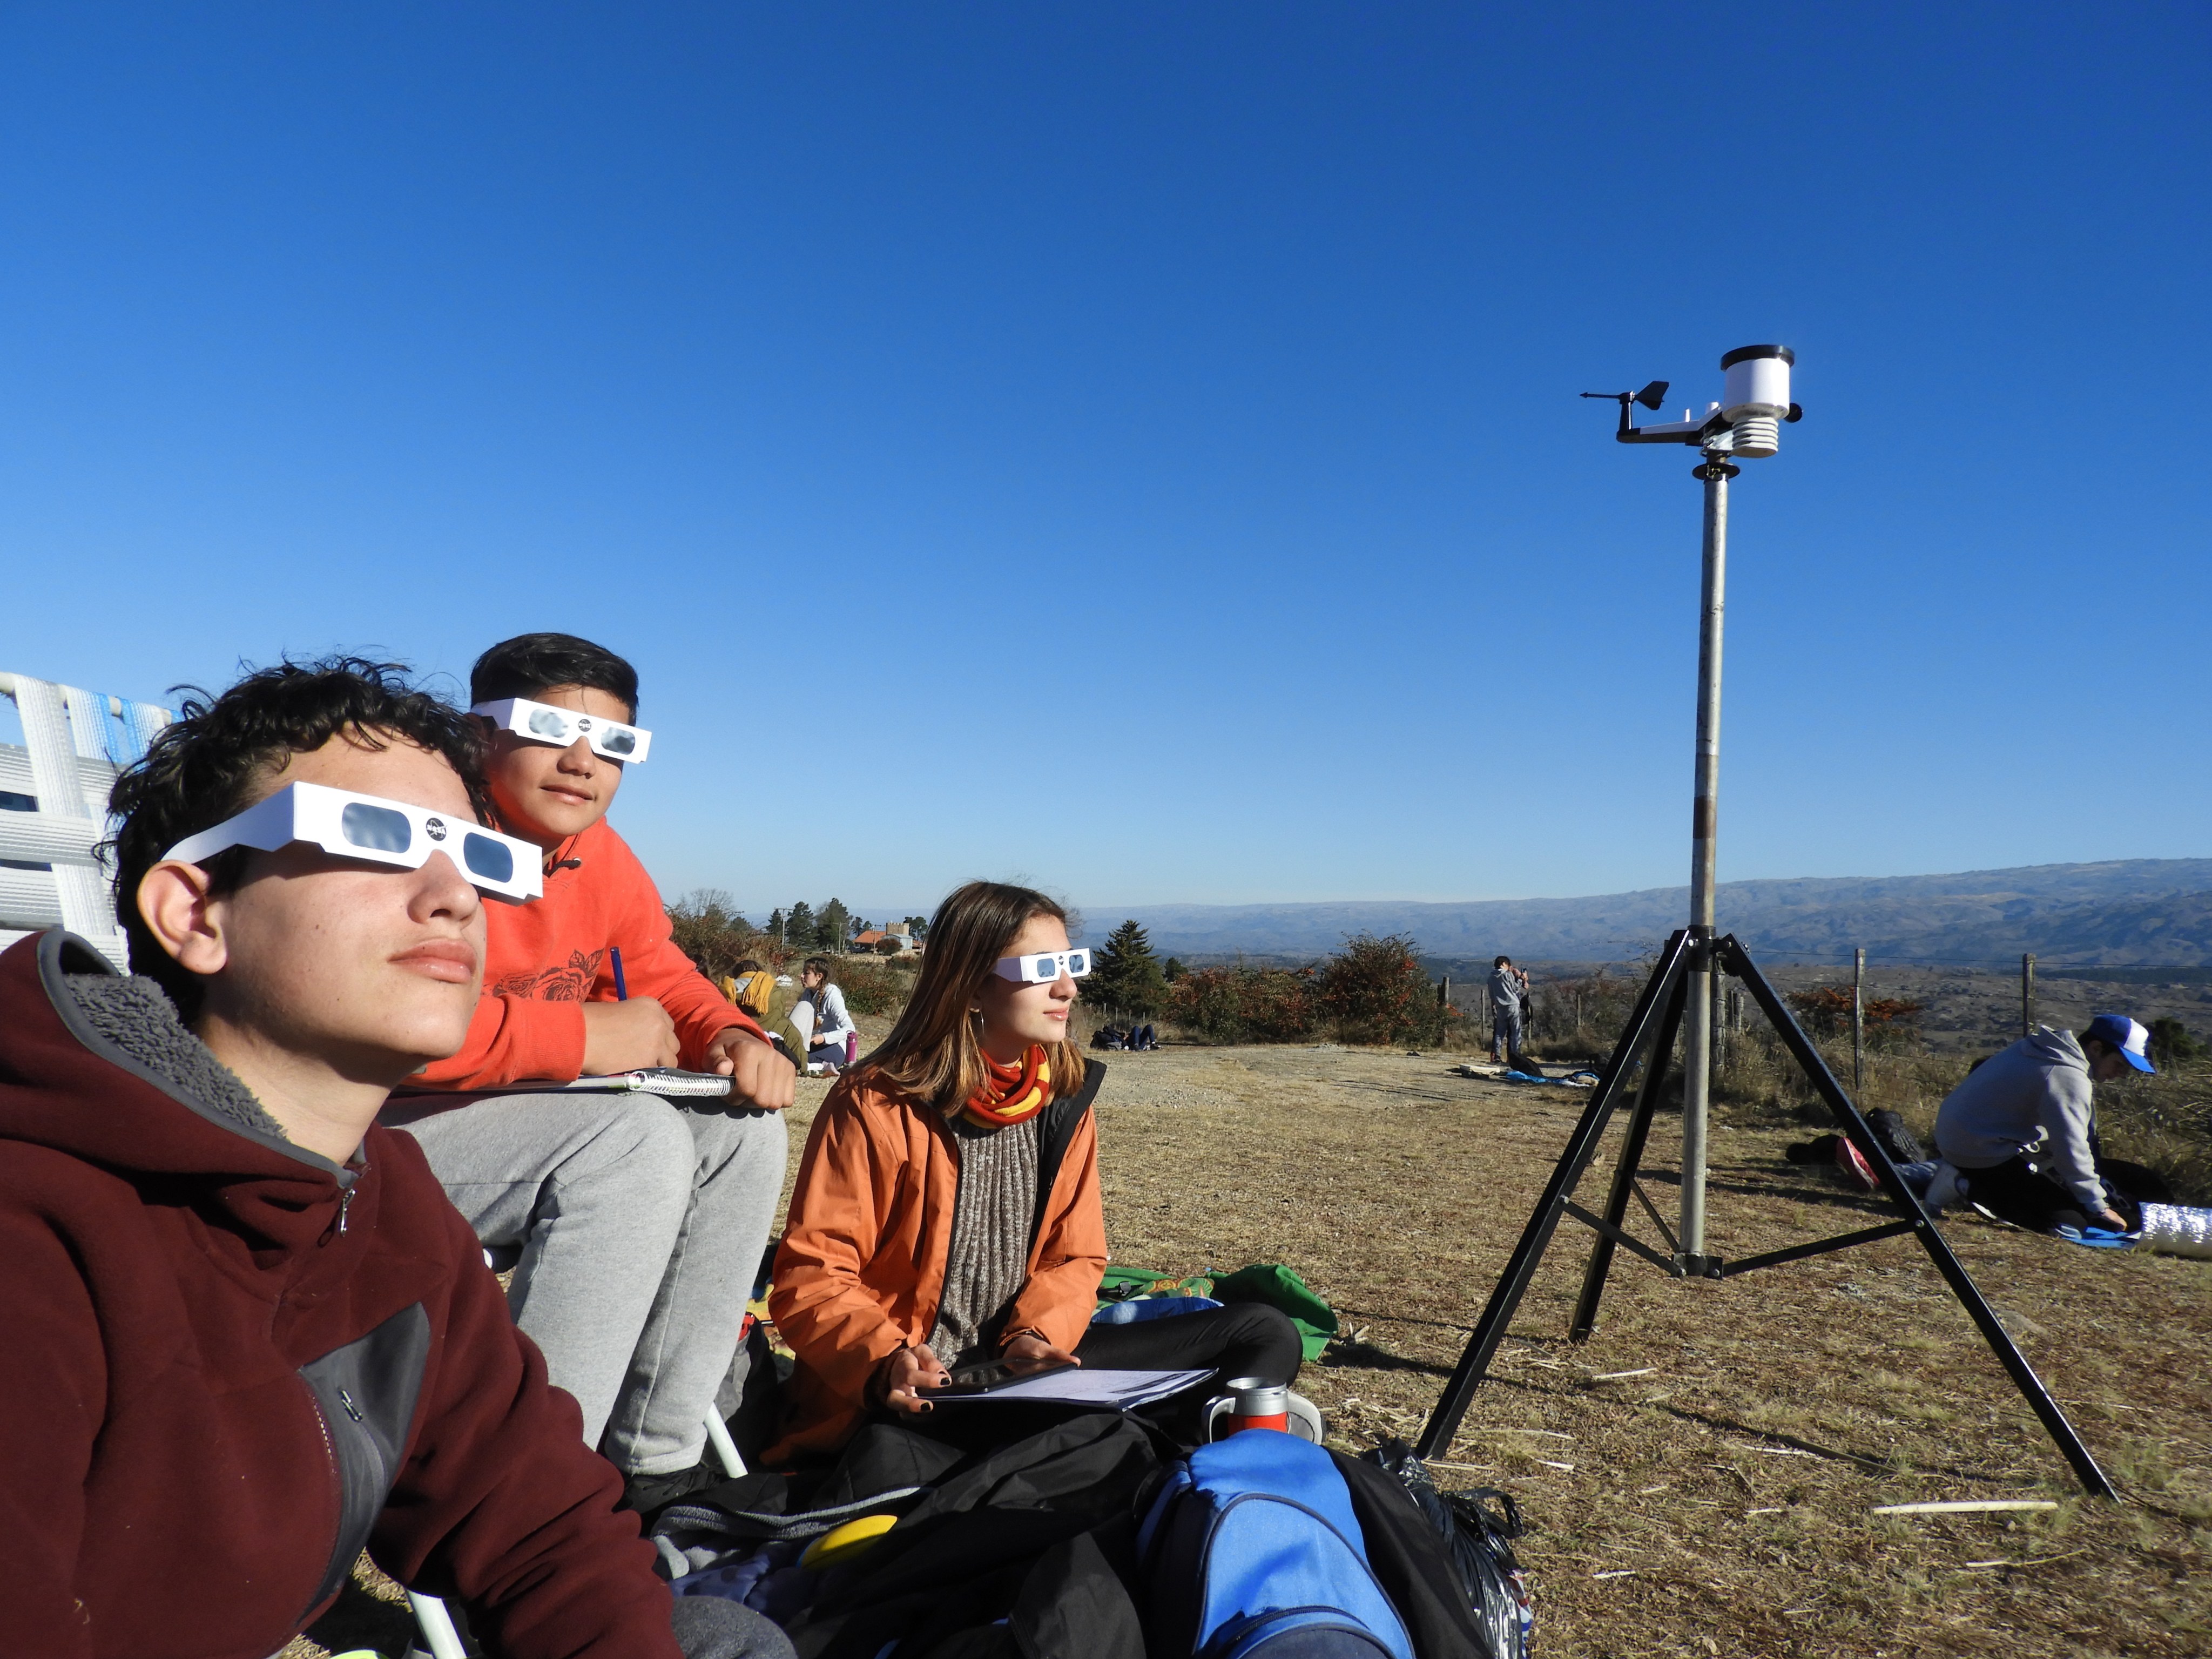 Argentine students gather cloud observations and temperature data to upload through the GLOBE Eclipse tool during the eclipse that crossed South America on July 2, 2019.